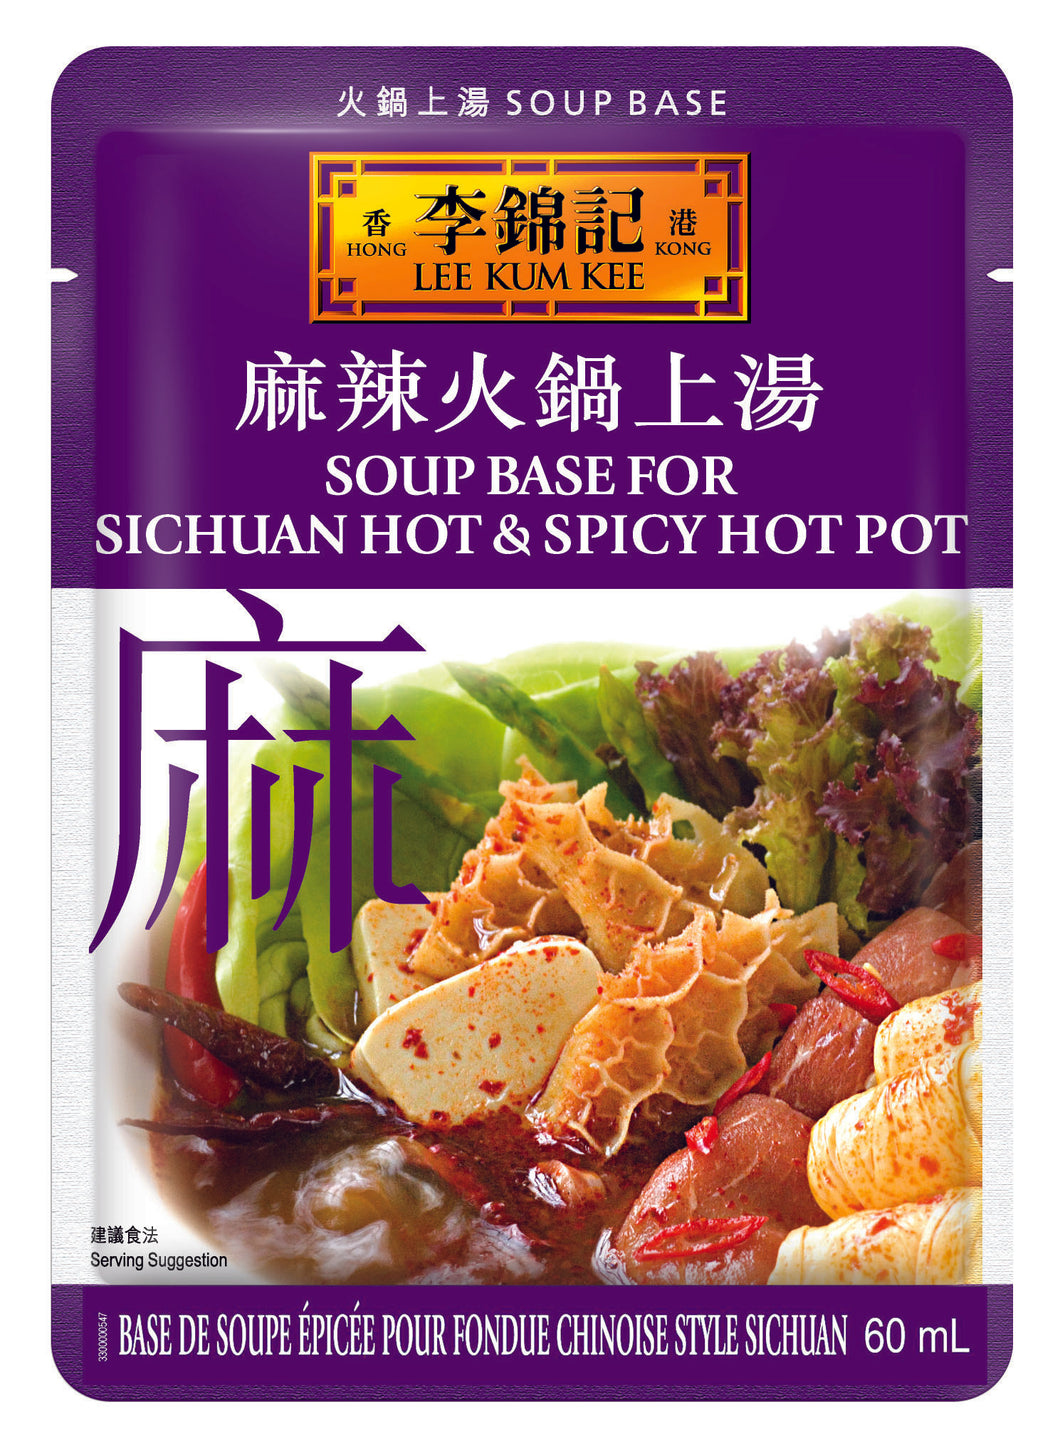 Soup Base for Sichuan Hot & Spicy Hot Pot (per pack)